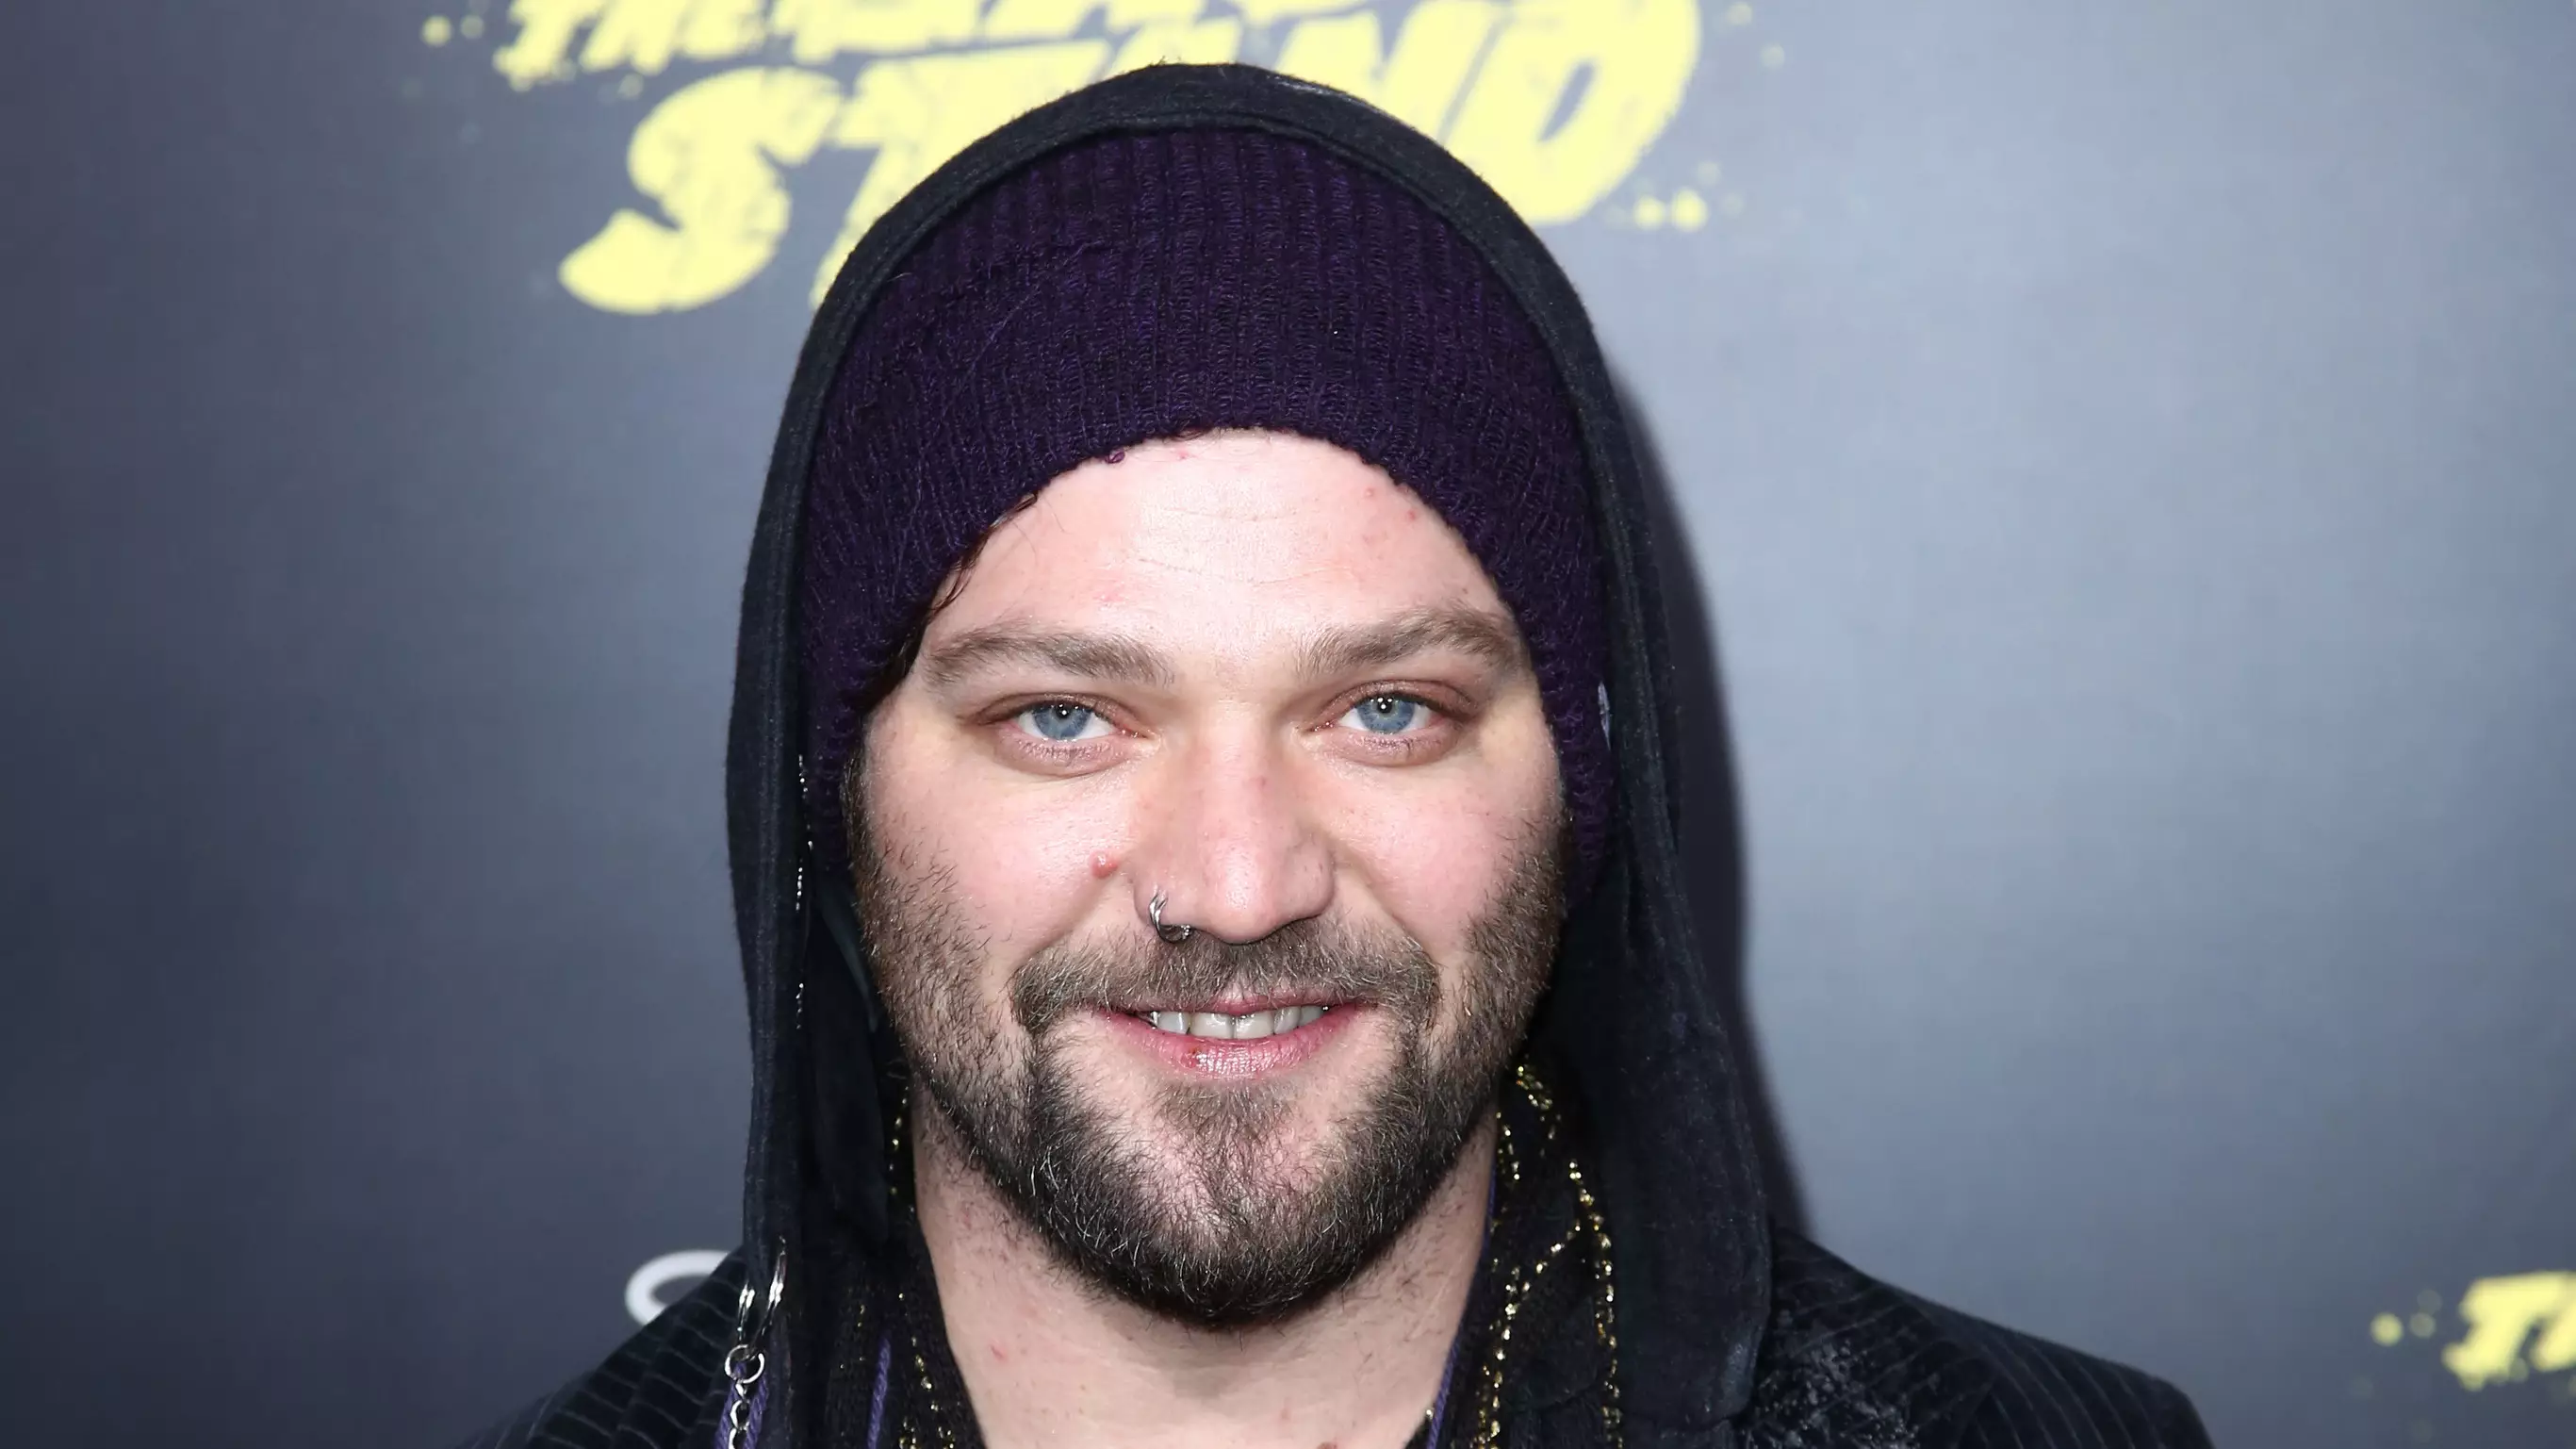 Bam Margera Reveals He's Seeking Treatment For His Manic Bipolar Disorder 